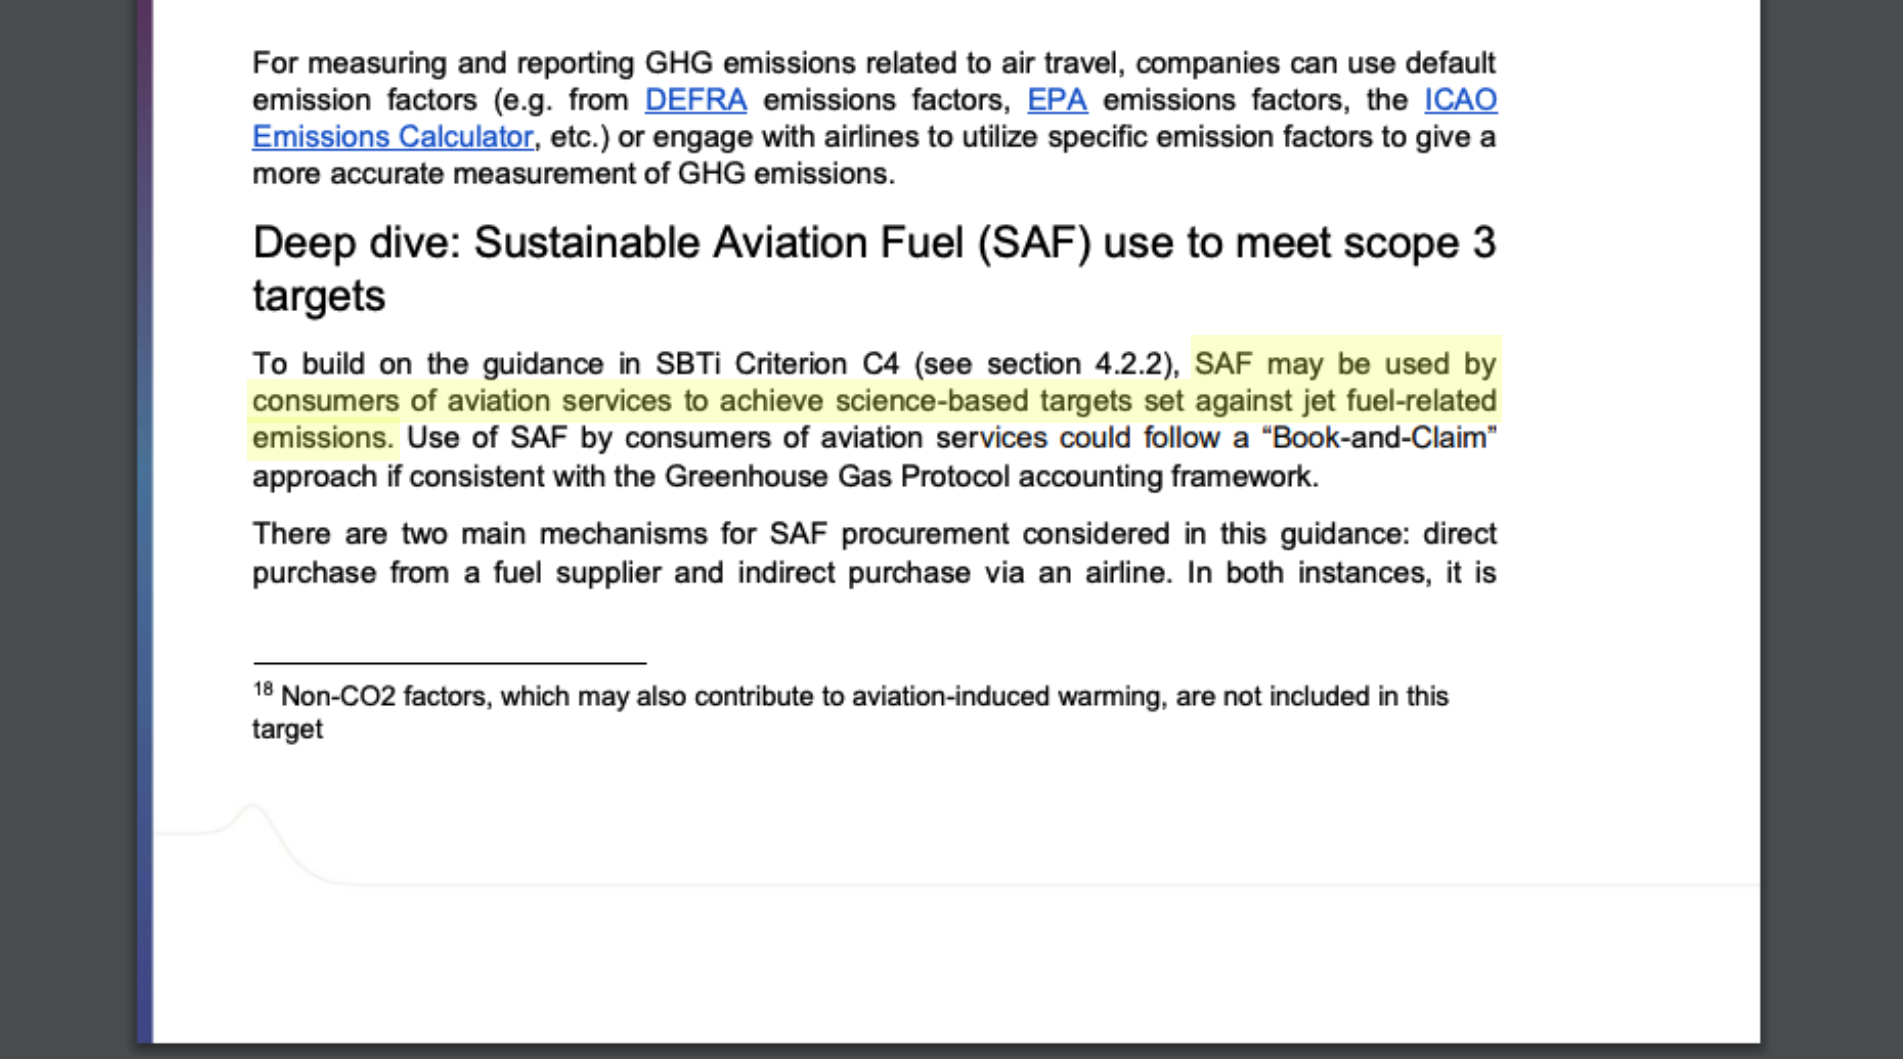 Screenshot of sustainable aviation fuel (SAF) guidance in the official Science Based Targets initiative (SBTi) Aviation Guidance document